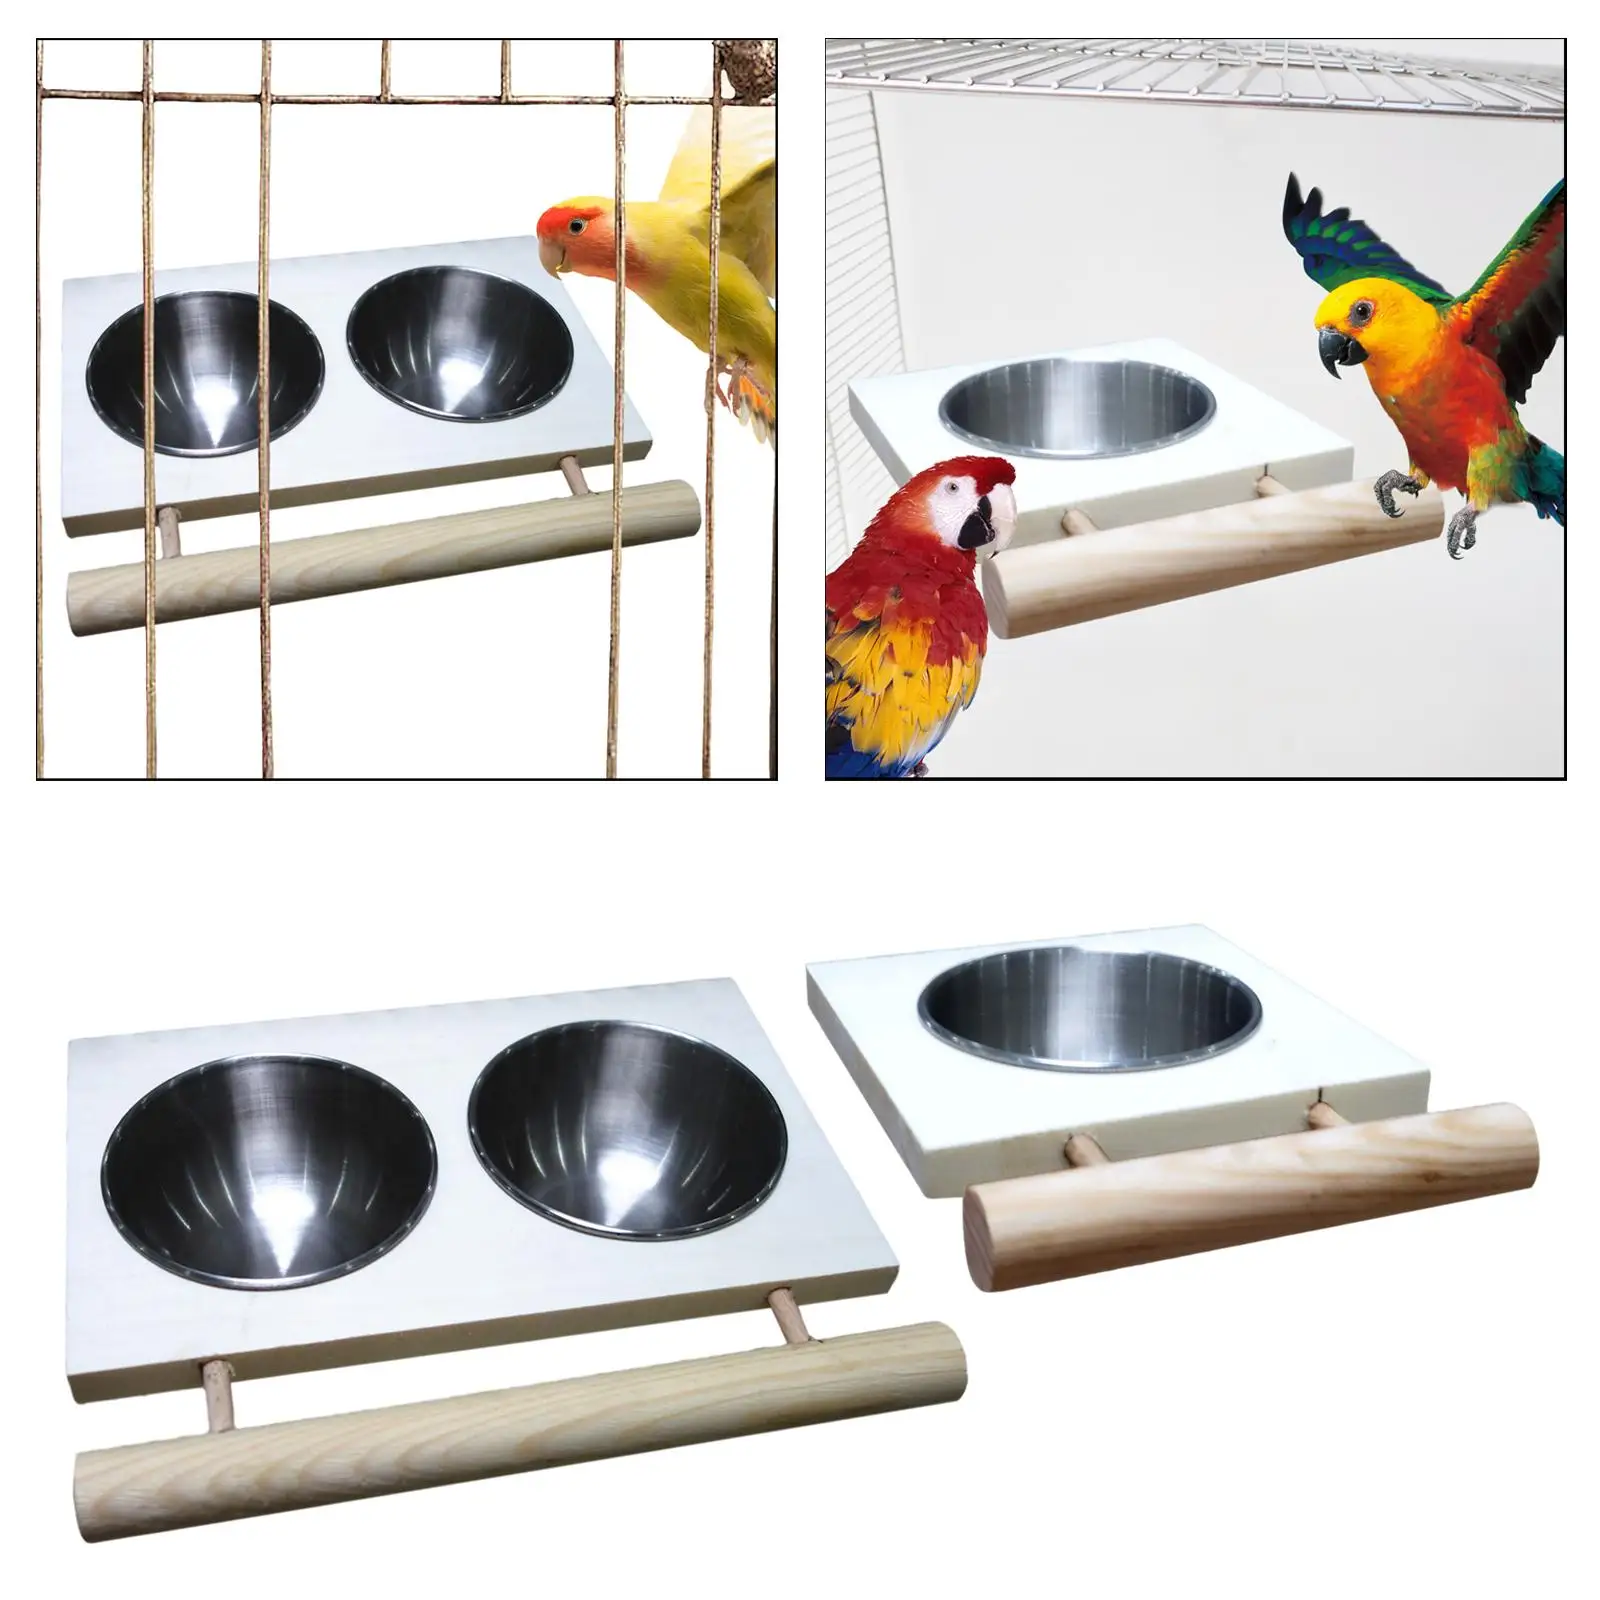 Bird Feeding Dish Cup Feeding and Watering Supplies Sturdy Parrot Cage Feeder Water Bowl for Parrot Parakeets Conures Lovebirds